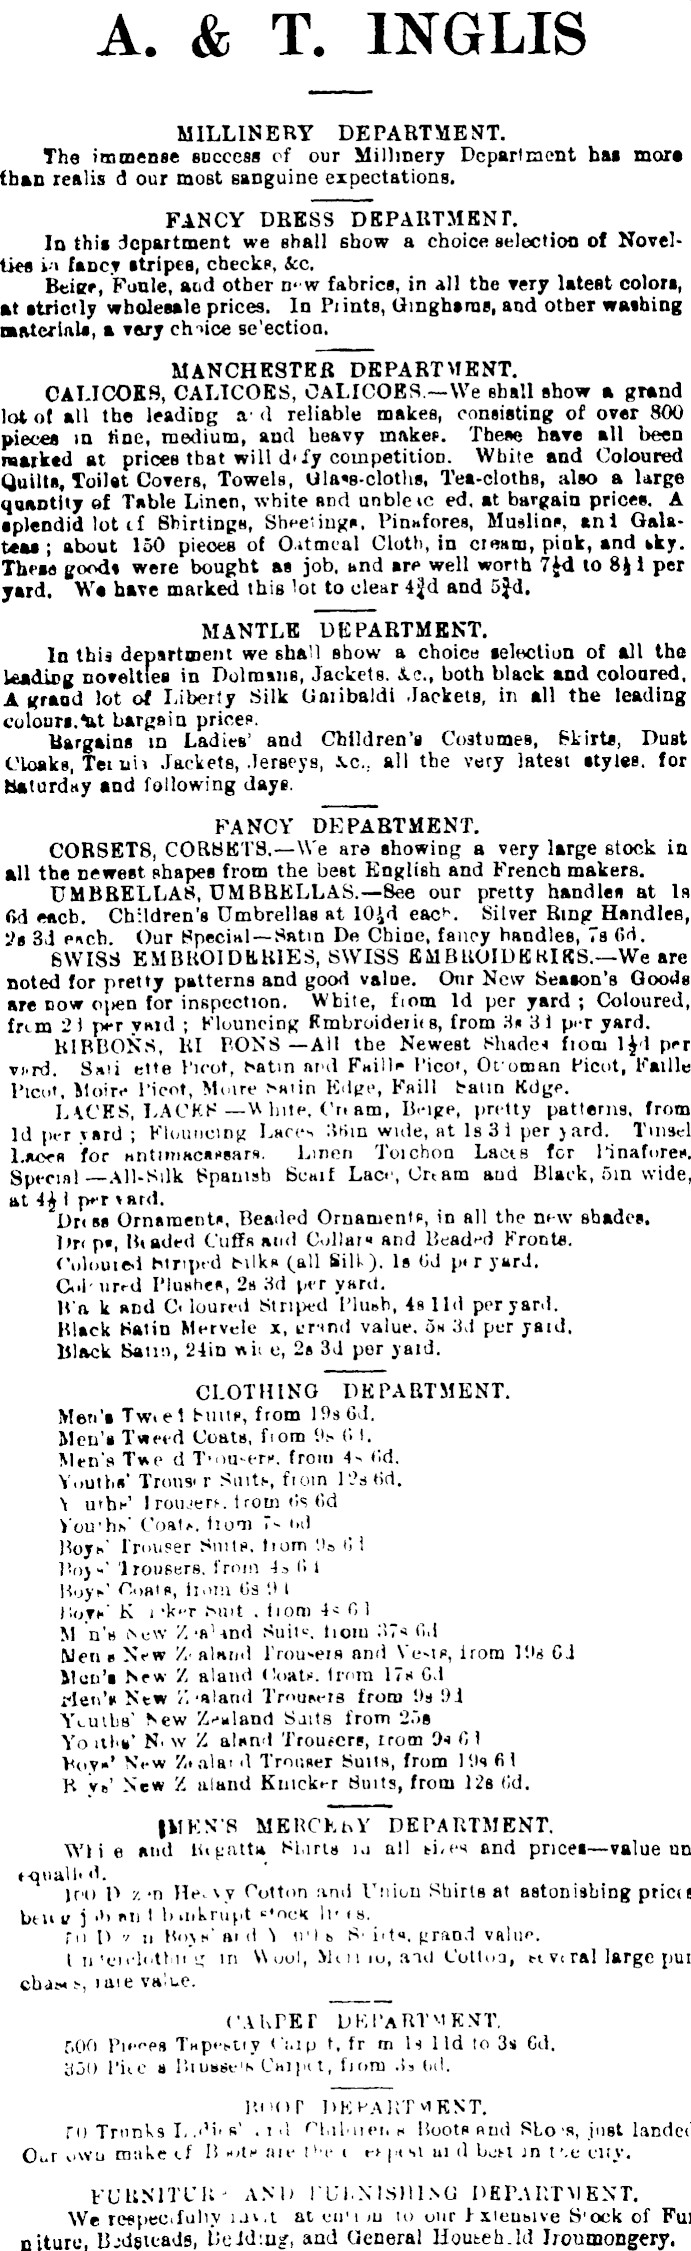 Papers Past Magazines And Journals New Zealand Tablet 1 February 1889 Page 10 Advertisements Column 1